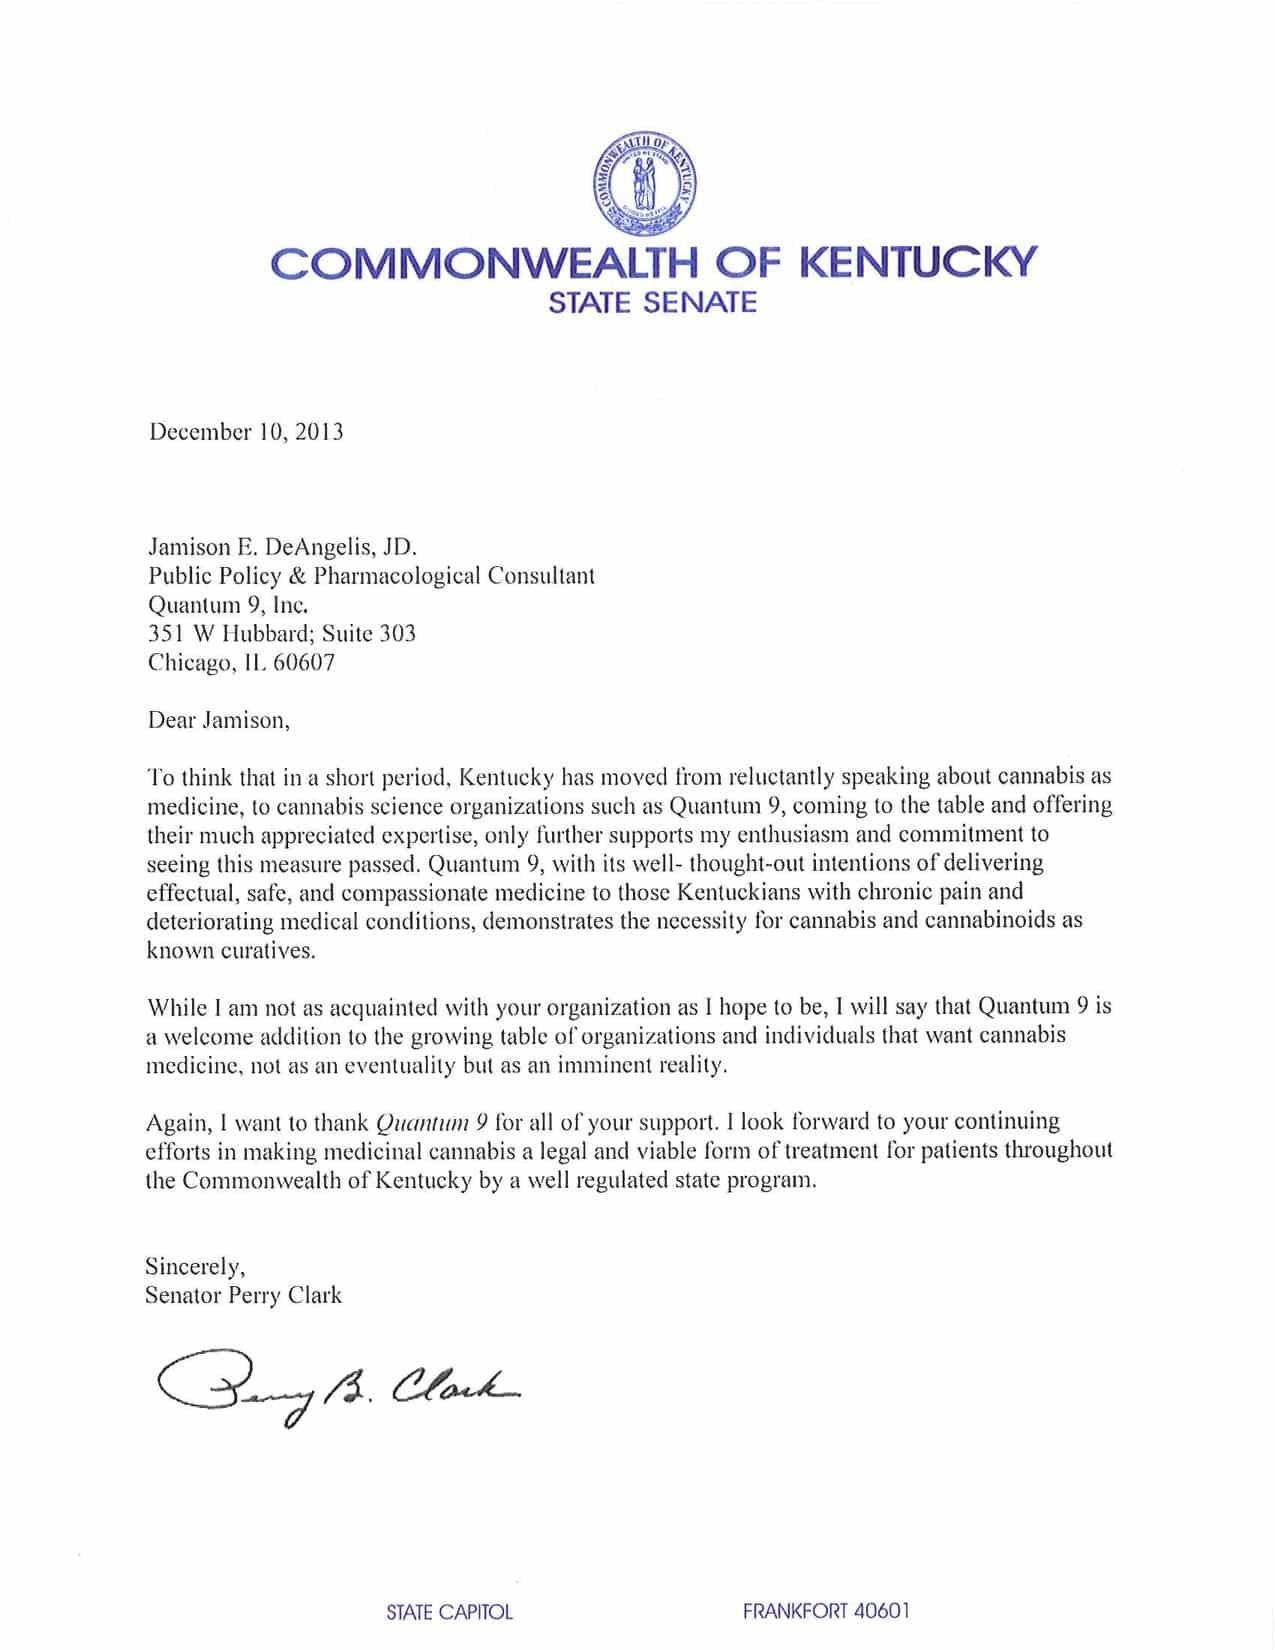 Kentucky Letter of Recommendation